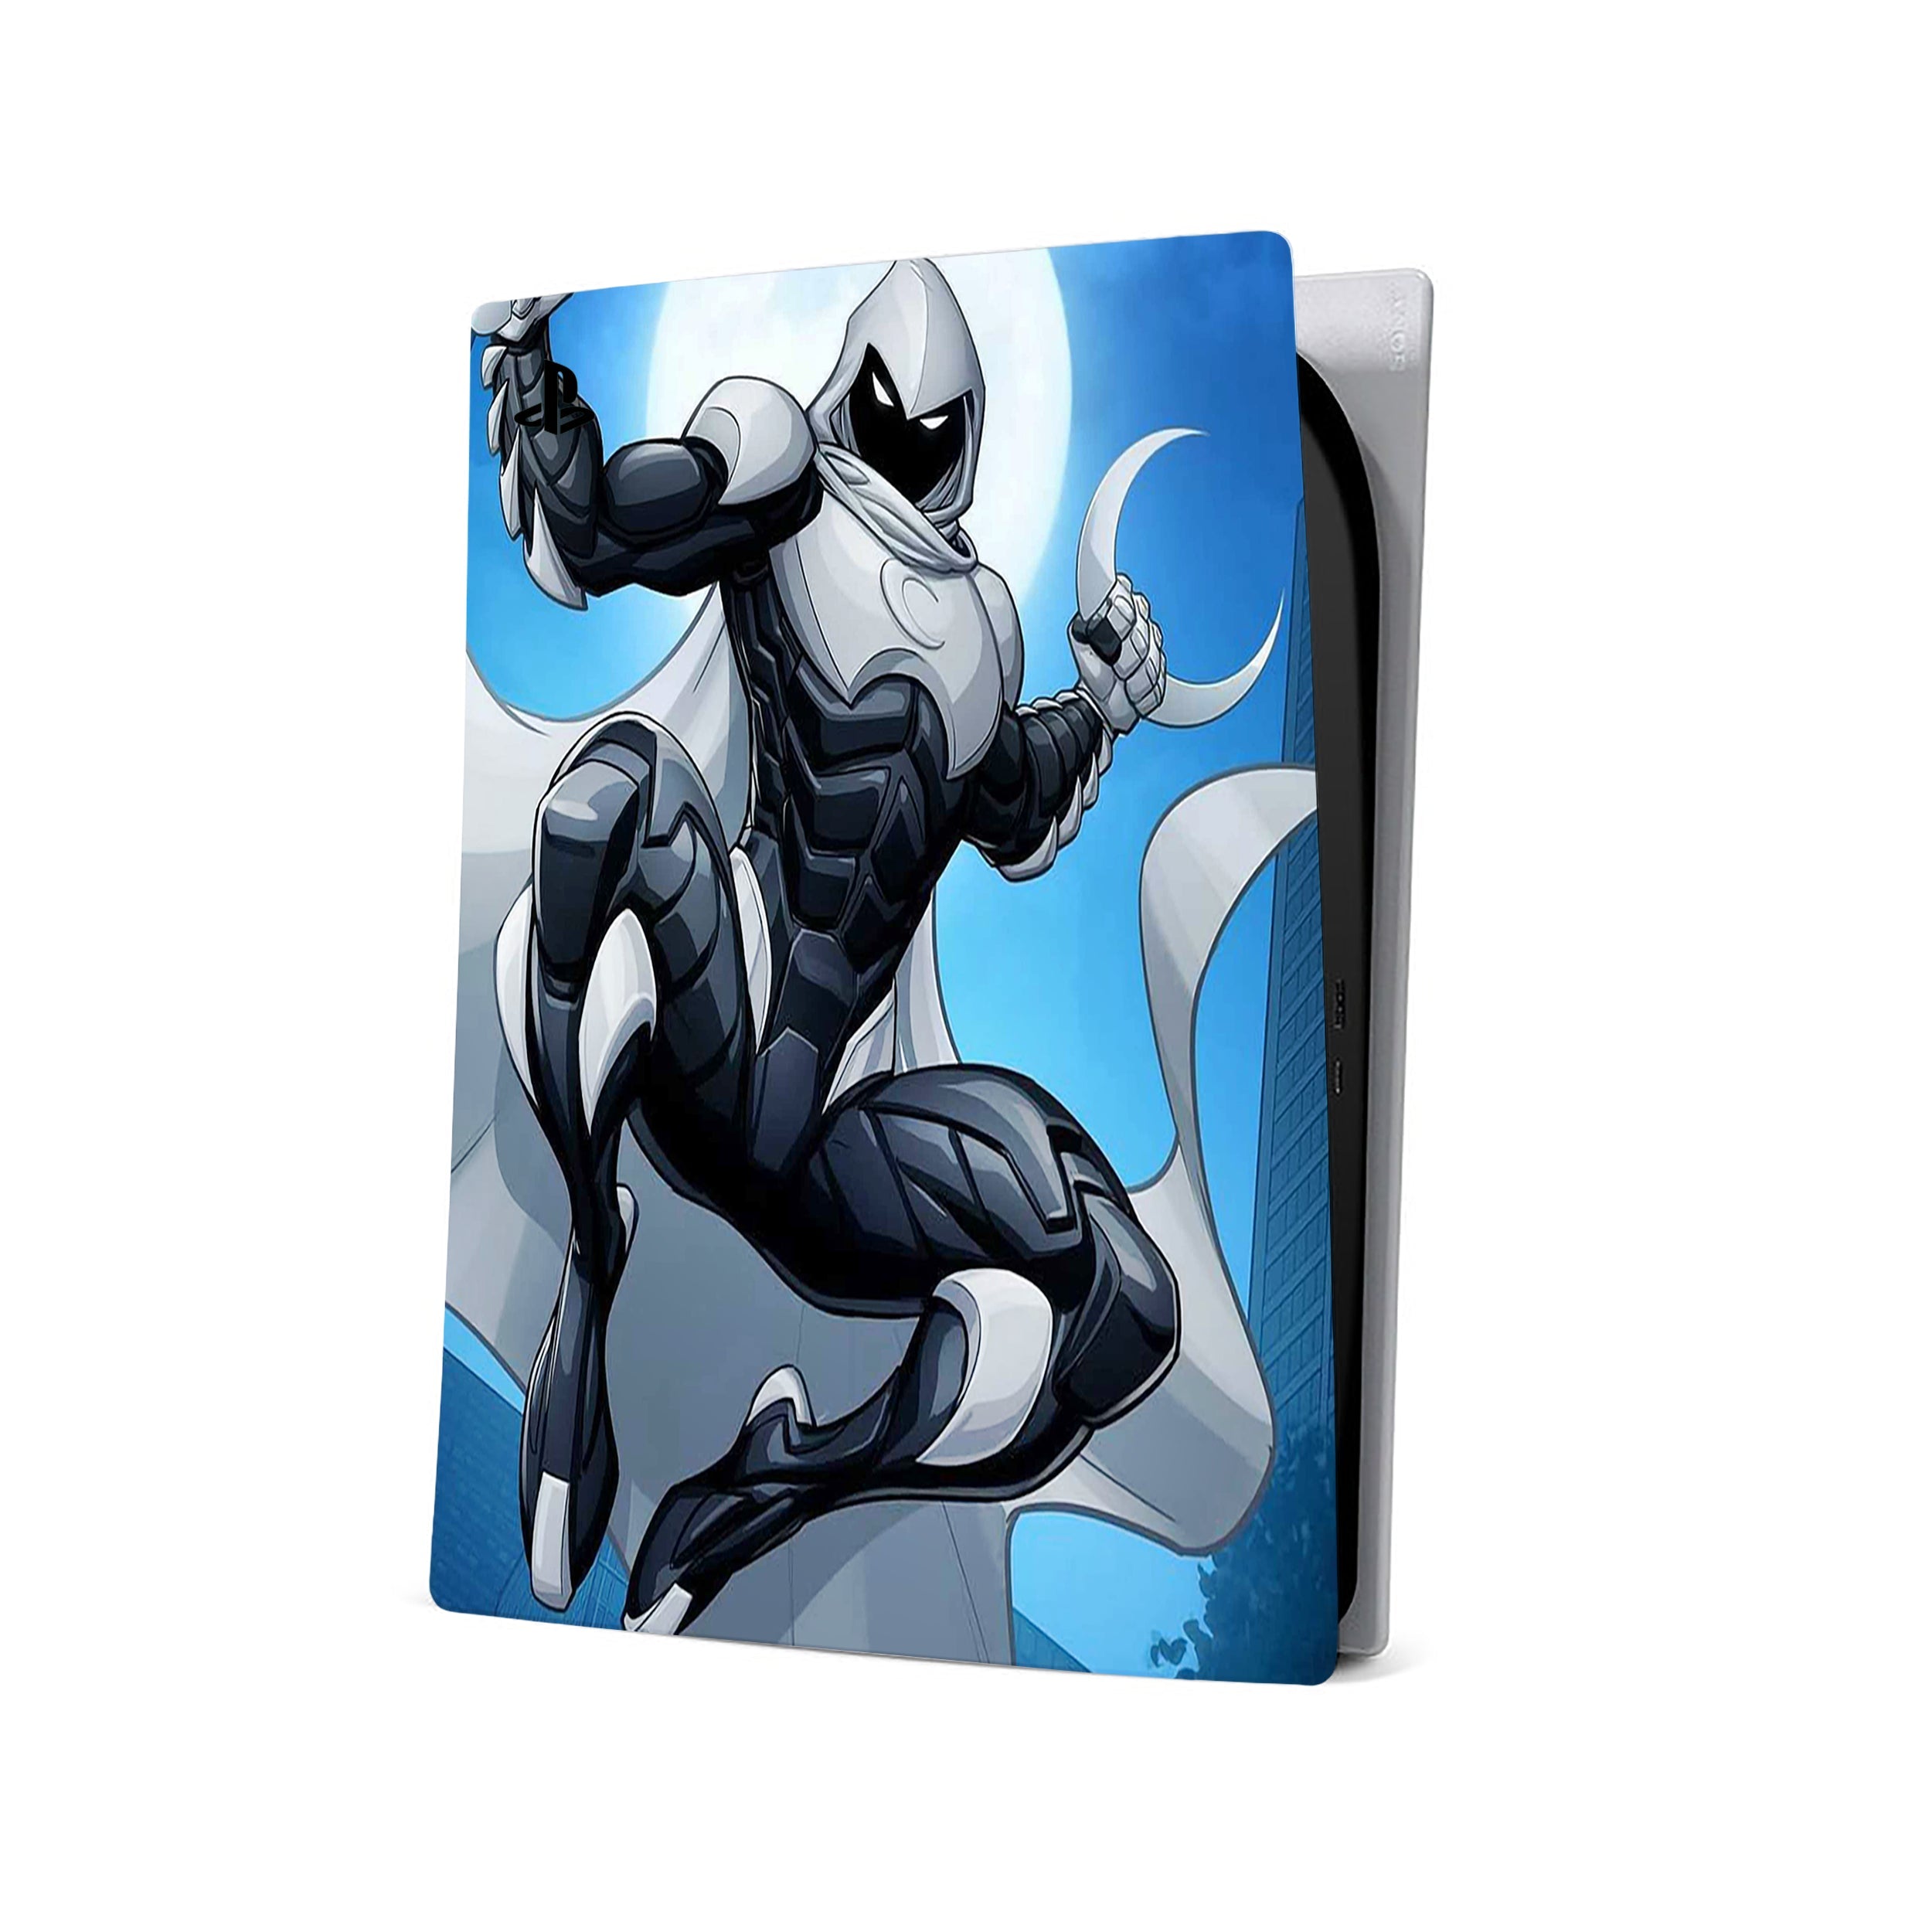 A video game skin featuring a Marvel Comics Moon Knight design for the PS5.